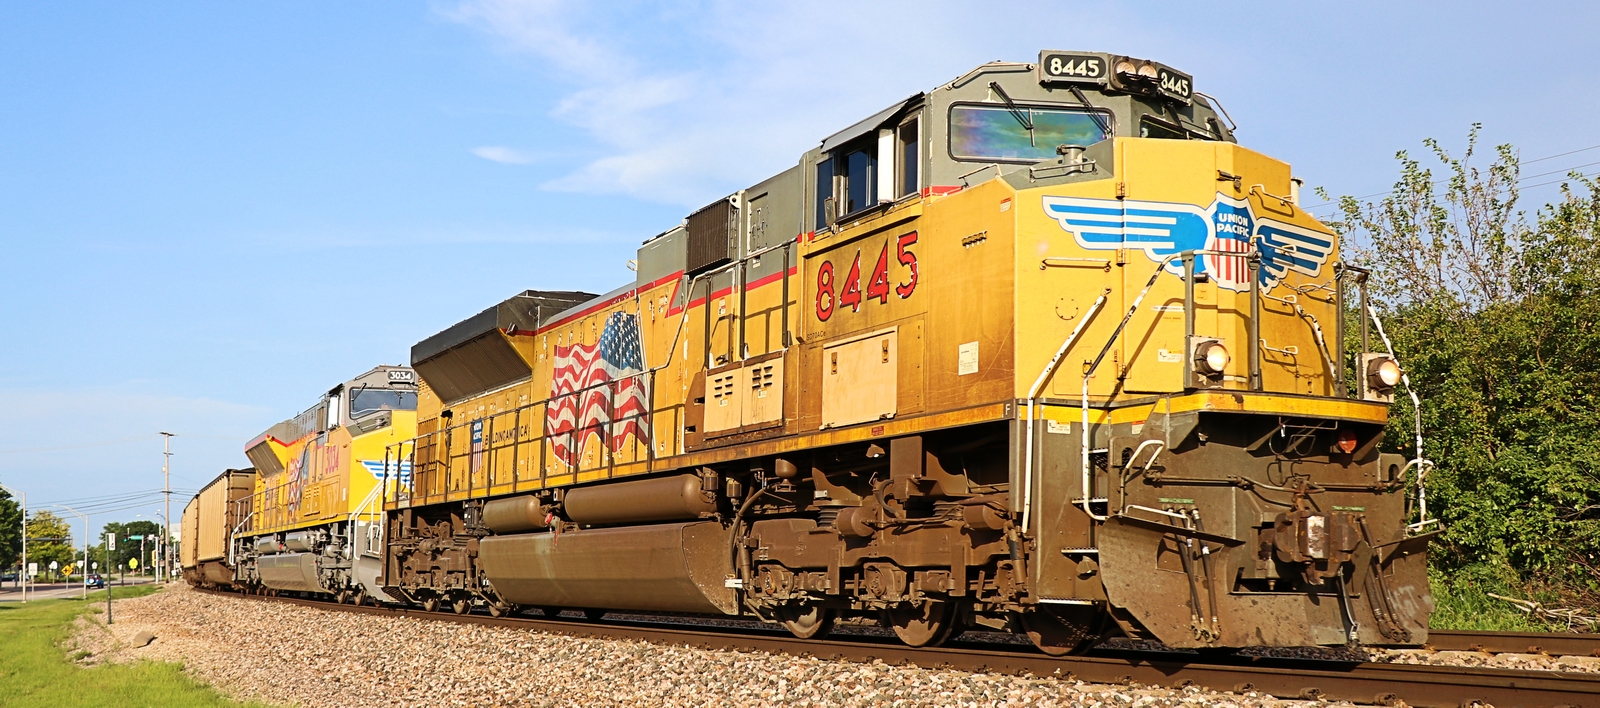 SD70ACe, the most successful variant of the SD70 series, which has sold almost 6,000 units since 1992